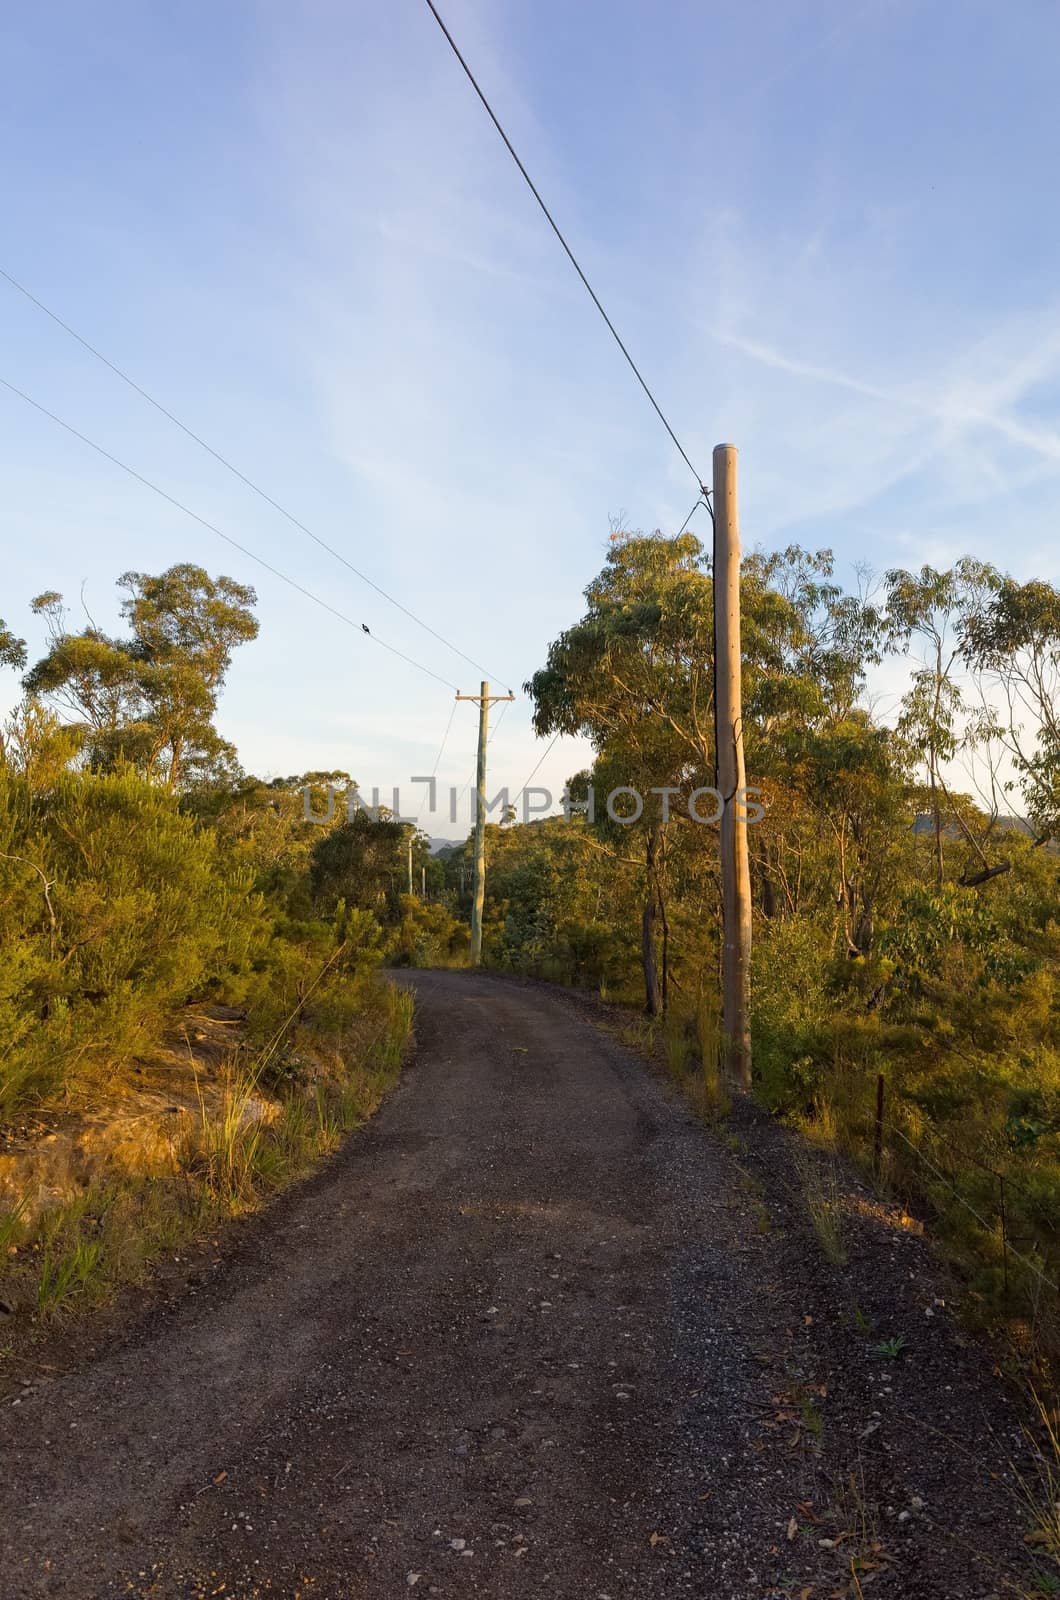 Photograph of an Australian dirt road with electric poles in the sunset